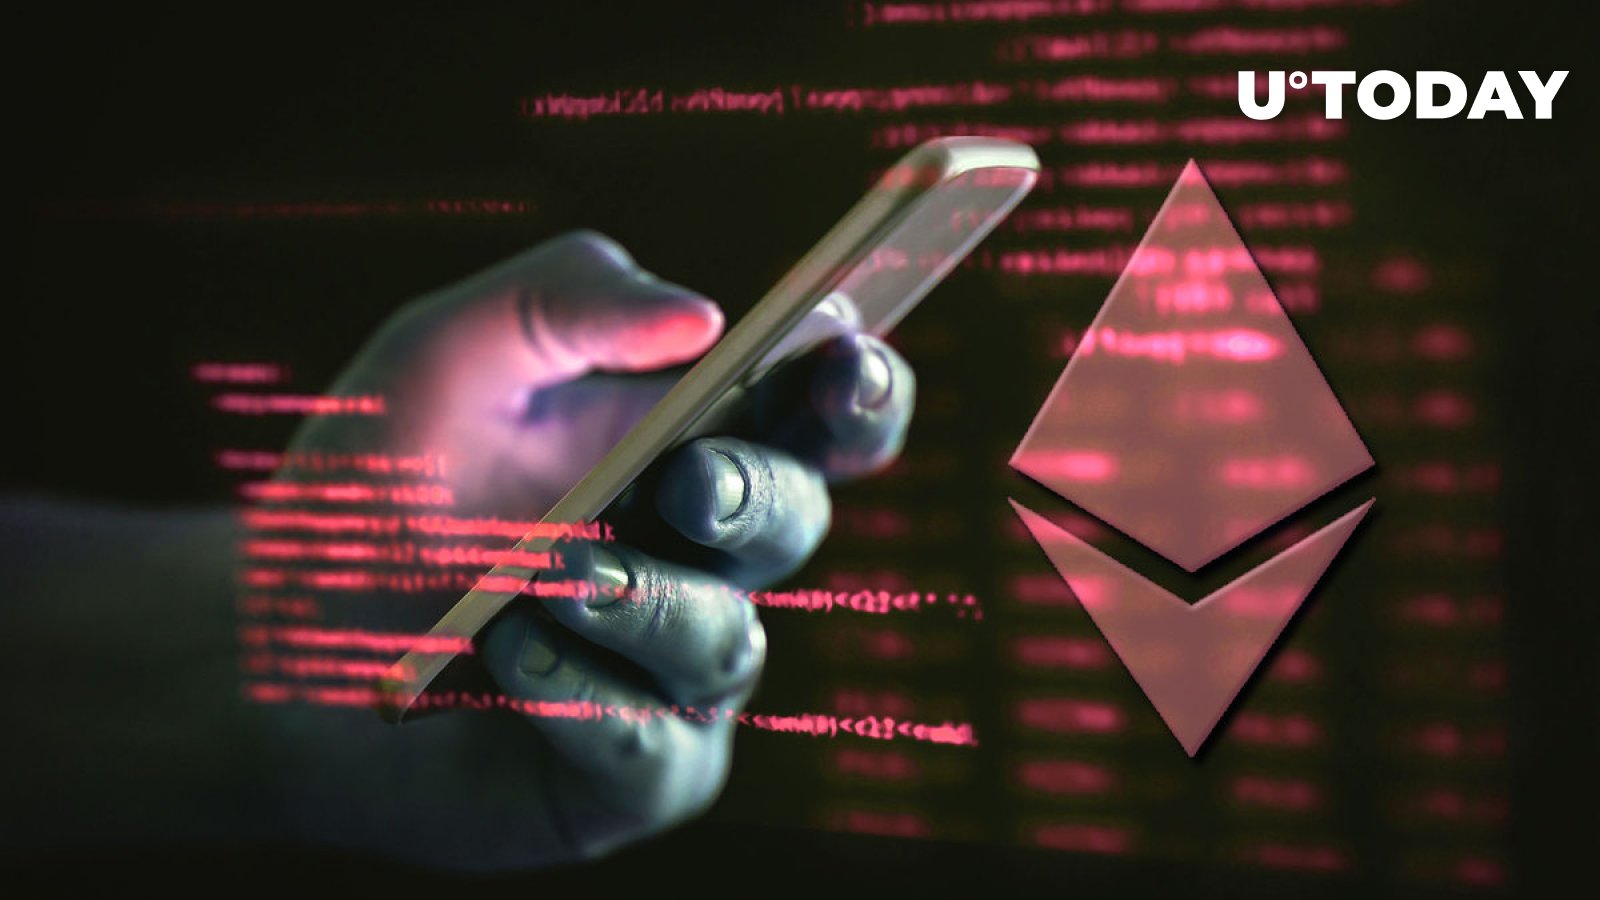 Scam Alert: EthereumPoW (ETHW) Community Targeted by Twitter Scam Campaign